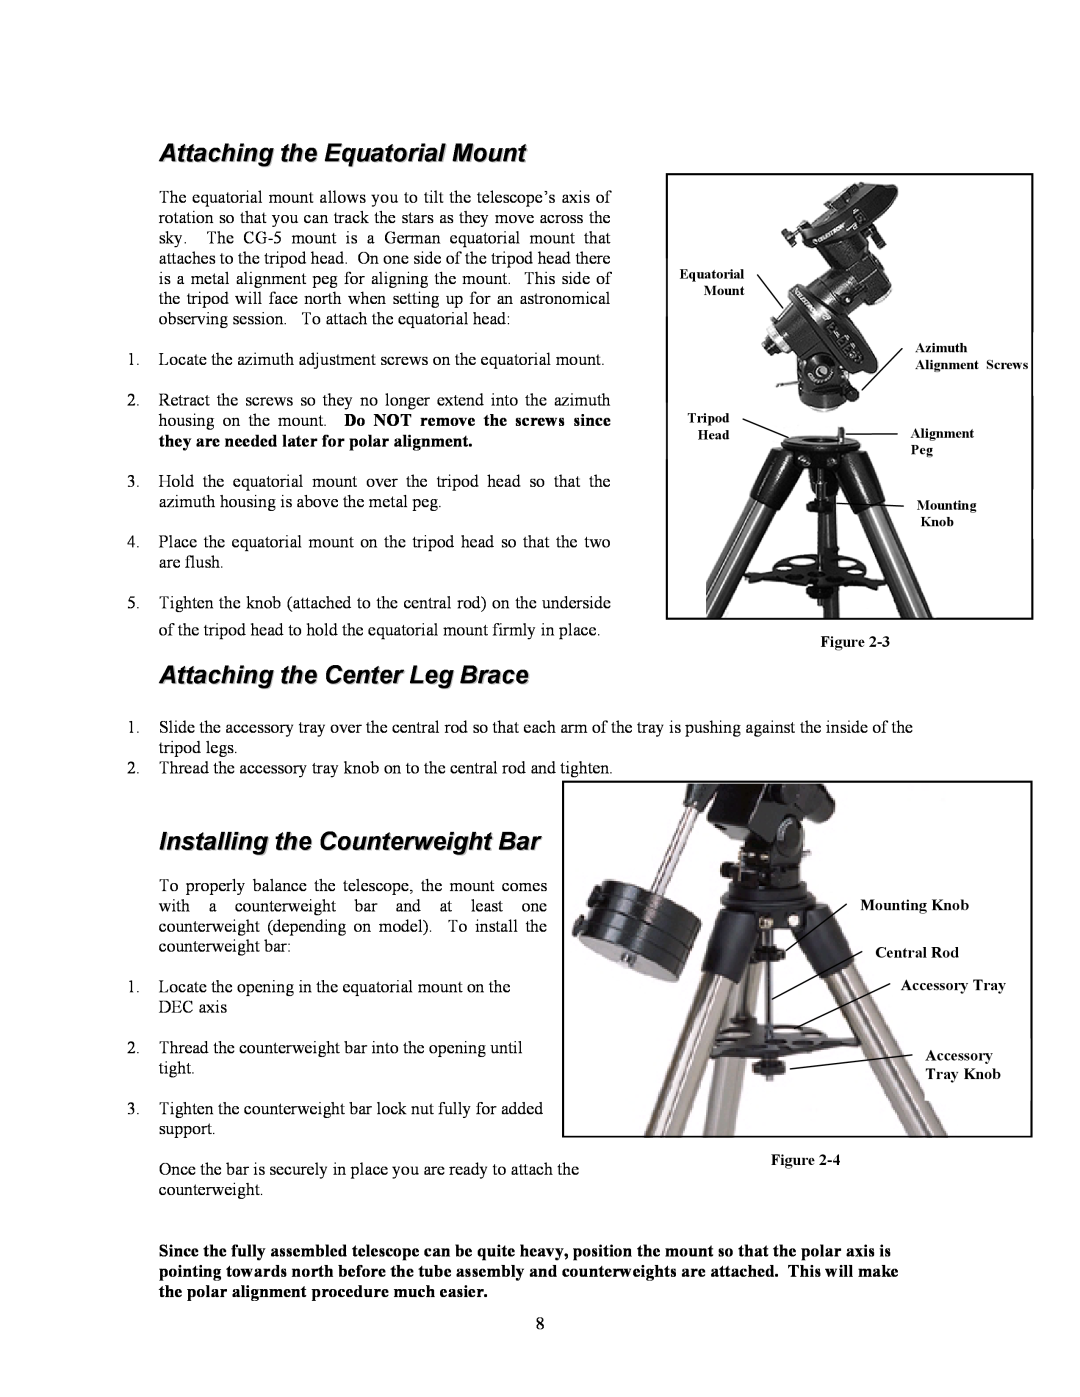 Celestron C9.25-S, C8-S Attaching the Equatorial Mount, Attaching the Center Leg Brace, Installing the Counterweight Bar 